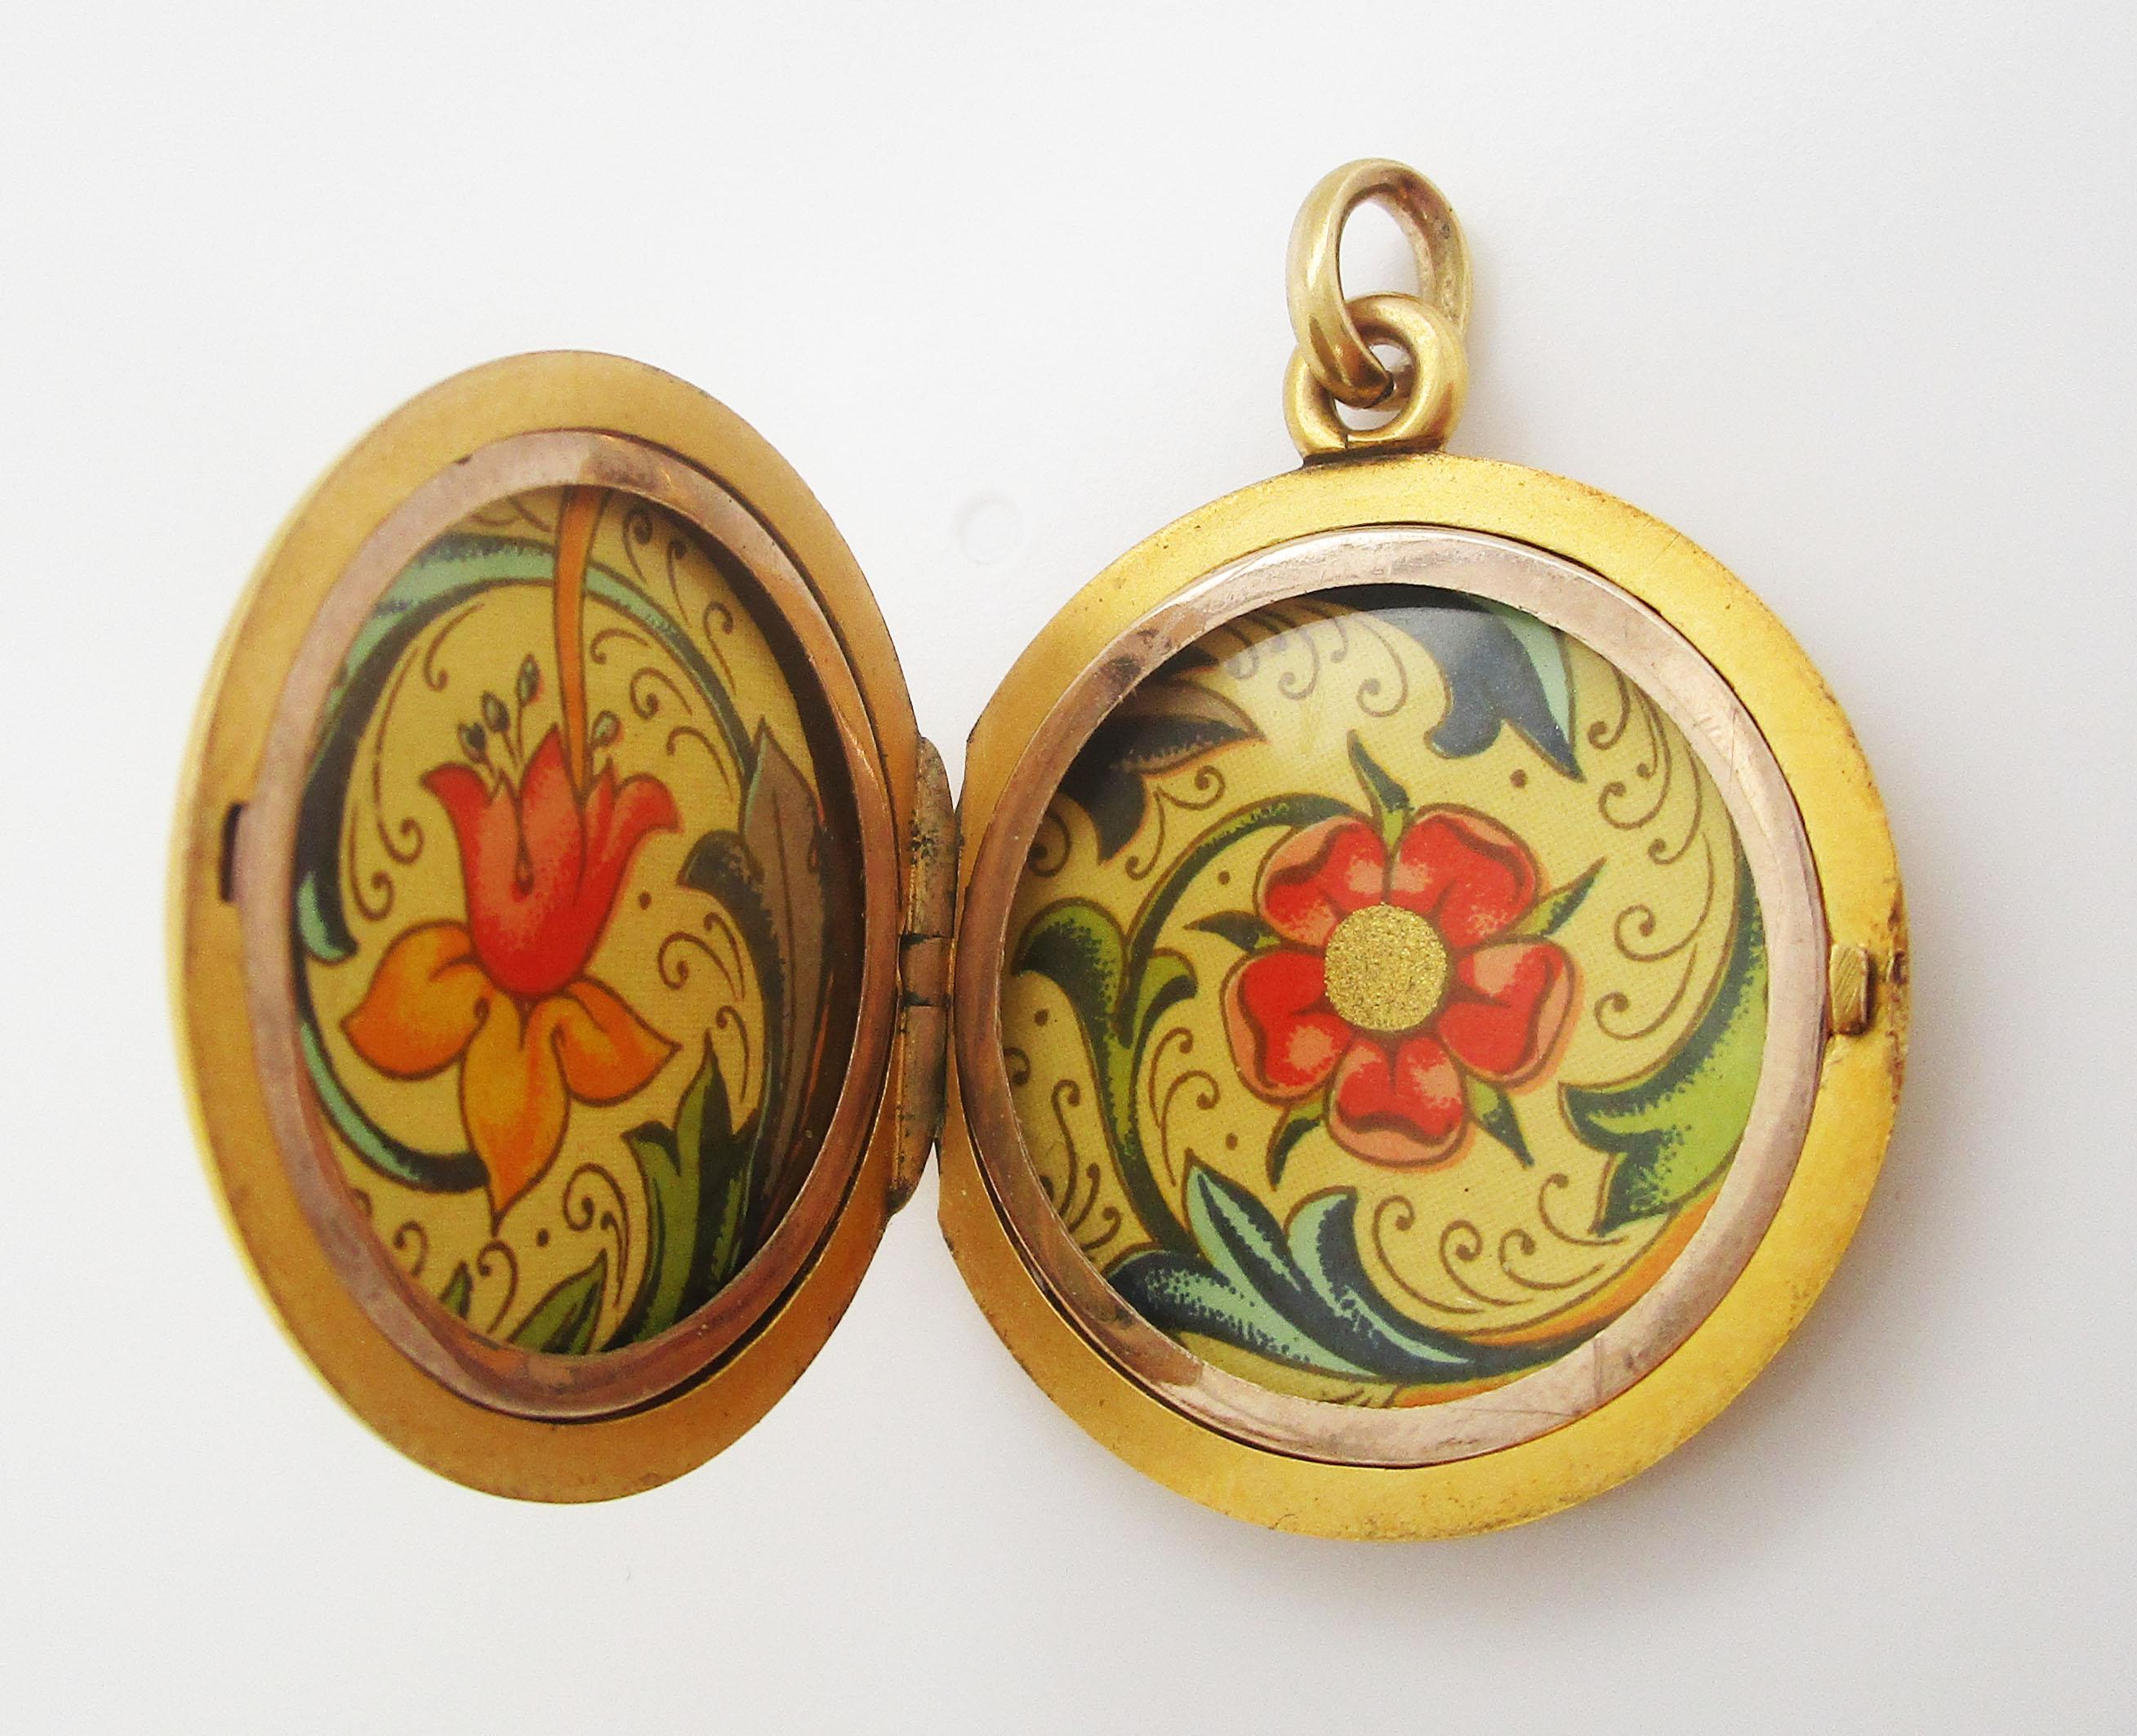 This is a gorgeous Victorian locket with a beautiful high-karat finish. The inside of the locket is decorated with a lovely floral paper. The back of the locket is open to be personalized! The locket is a classic round shape with a sleek, flat